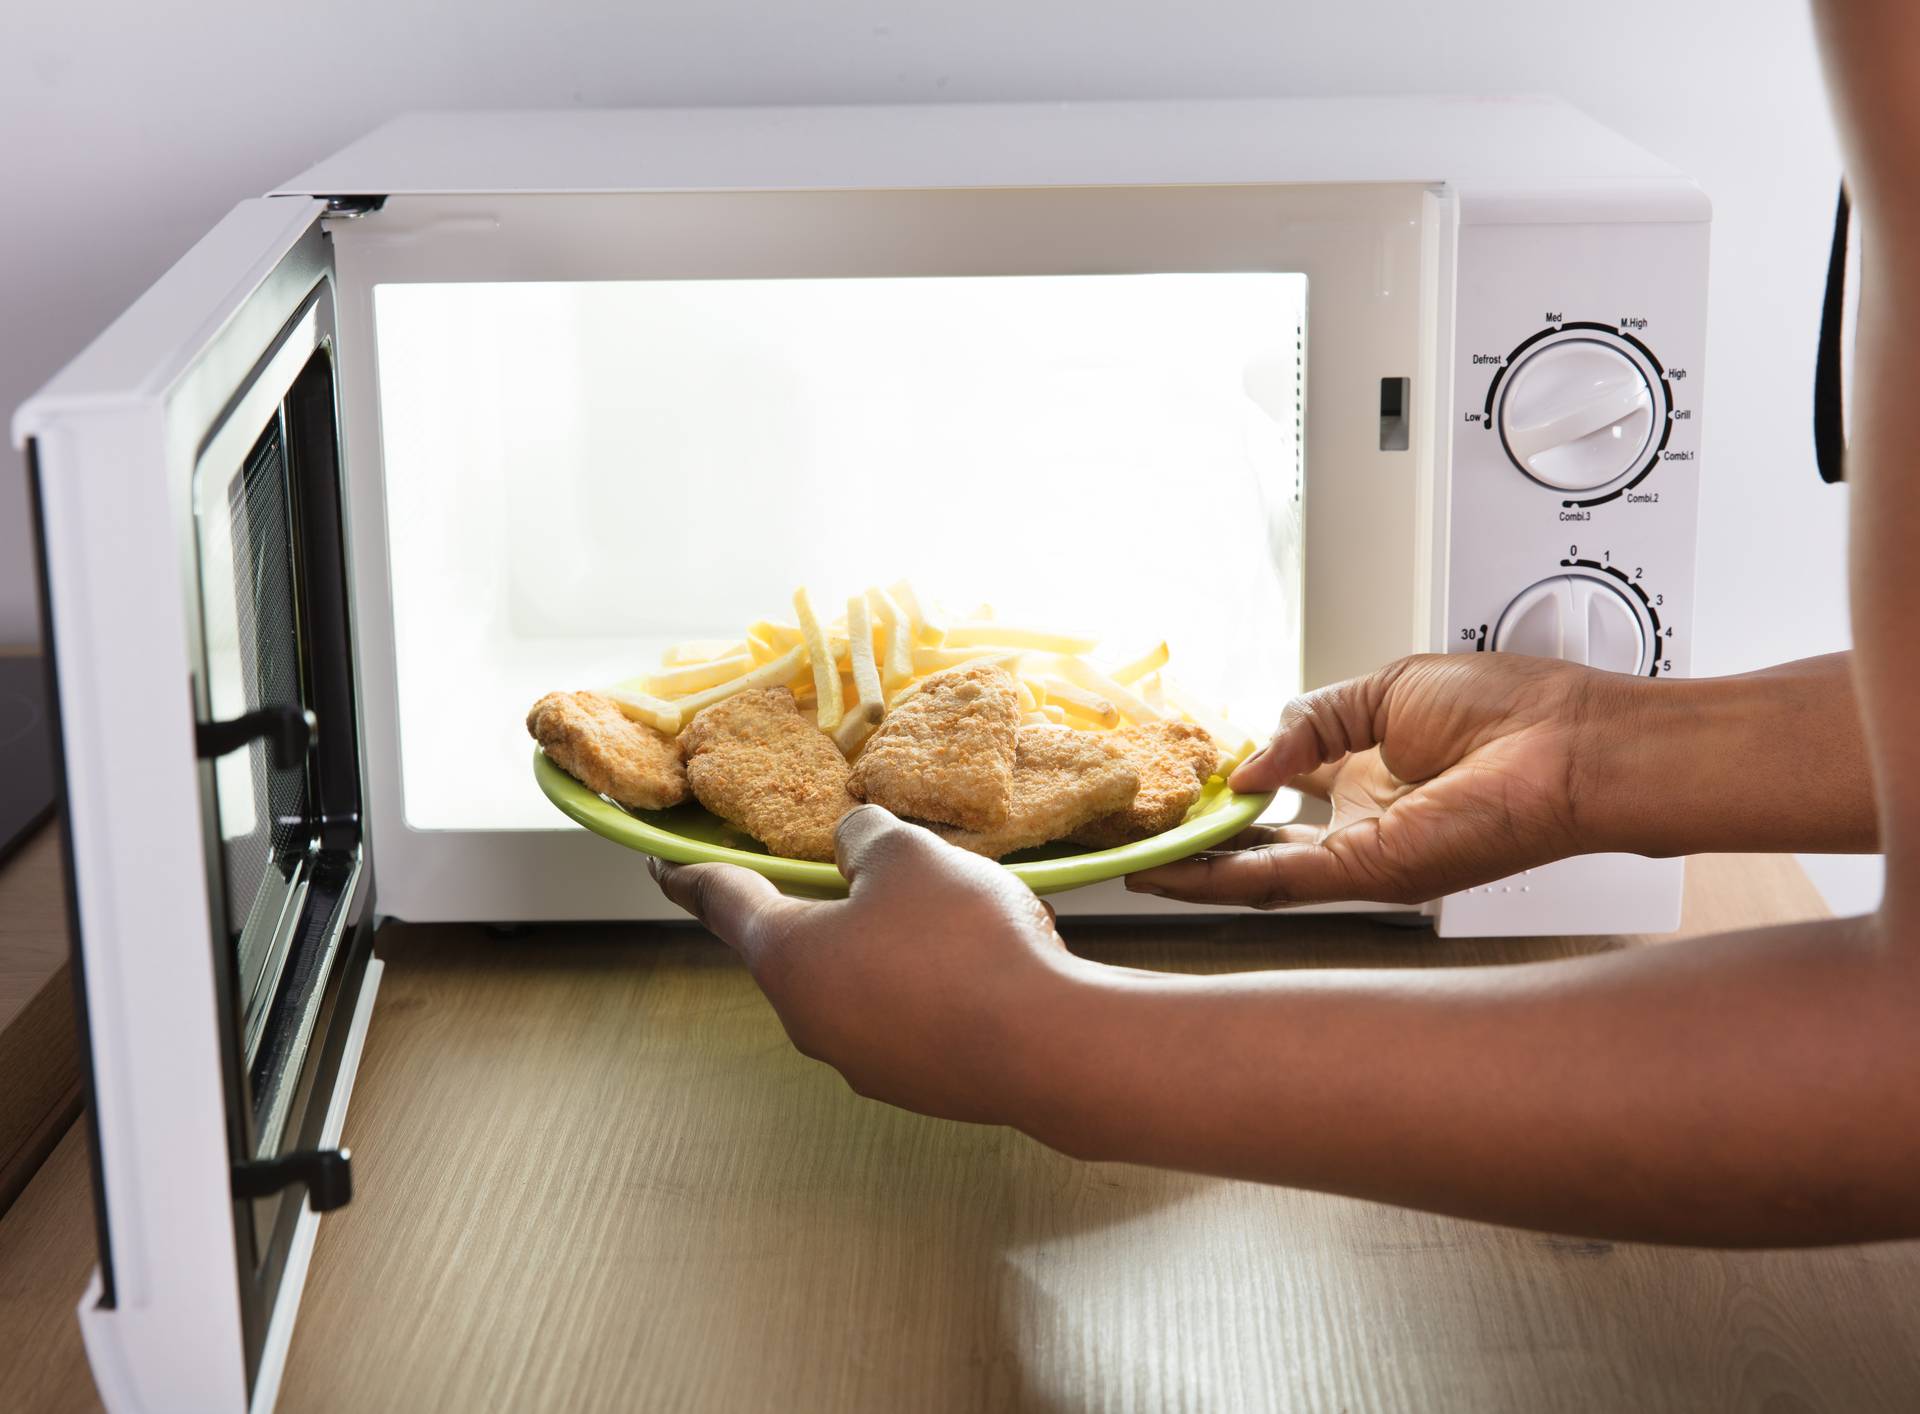 Person Heating Fried Food In Microwave Oven